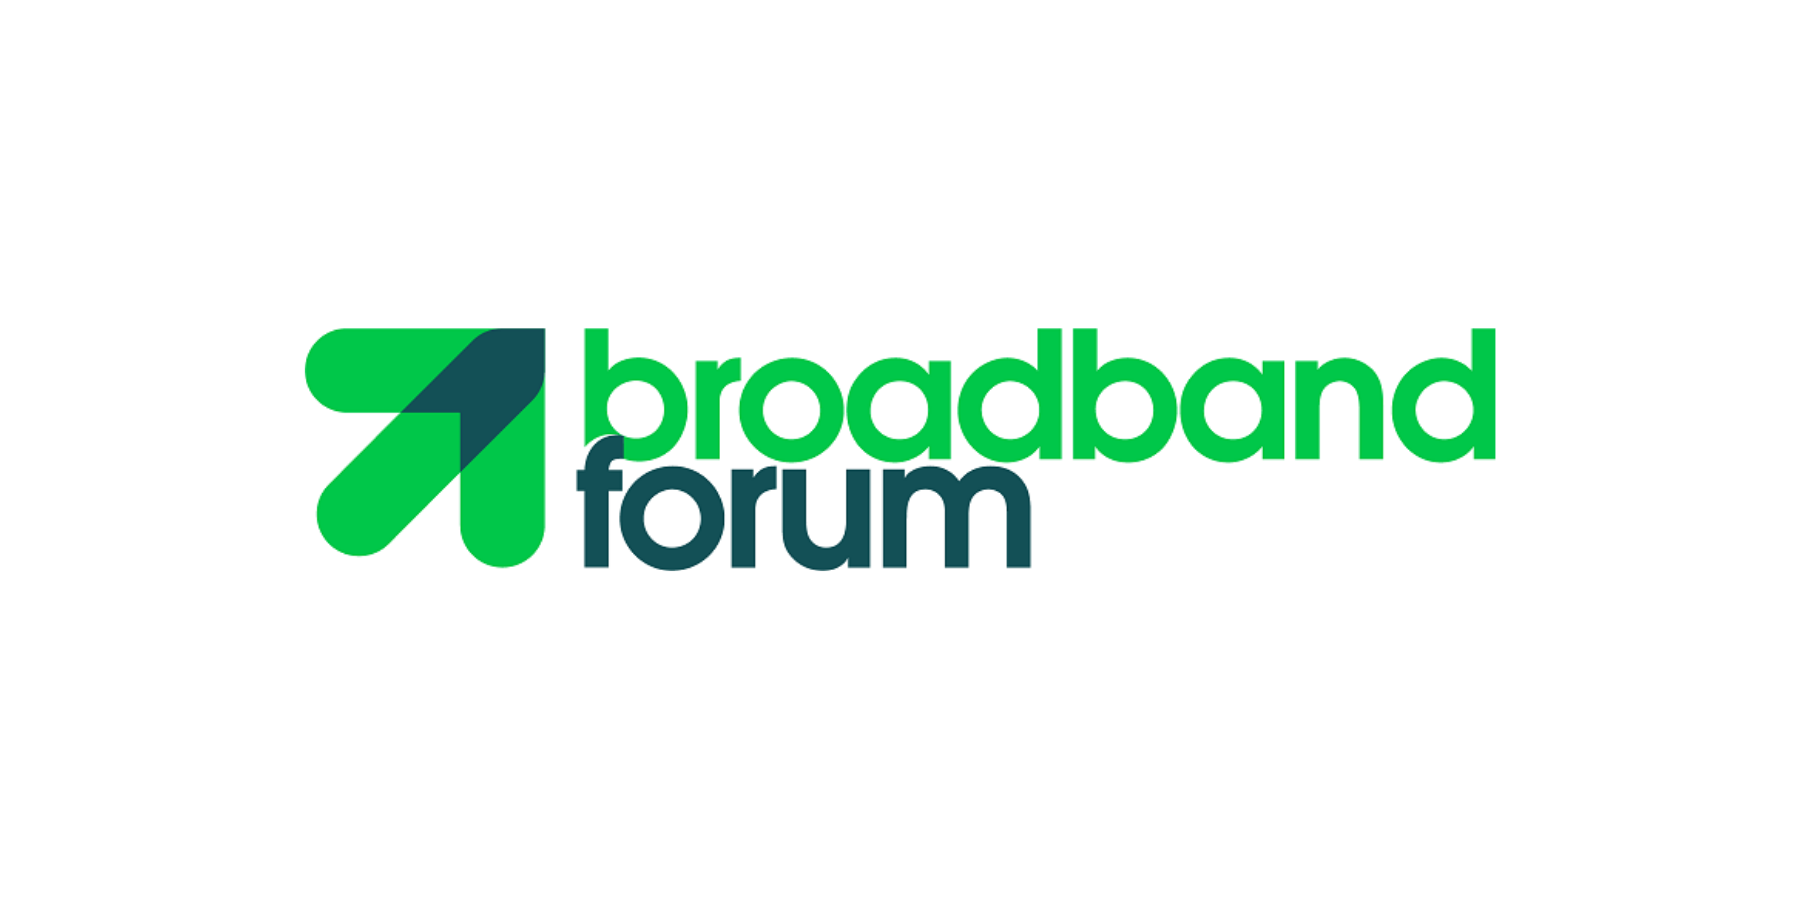 Consult Red joins Broadband Forum to help drive innovation